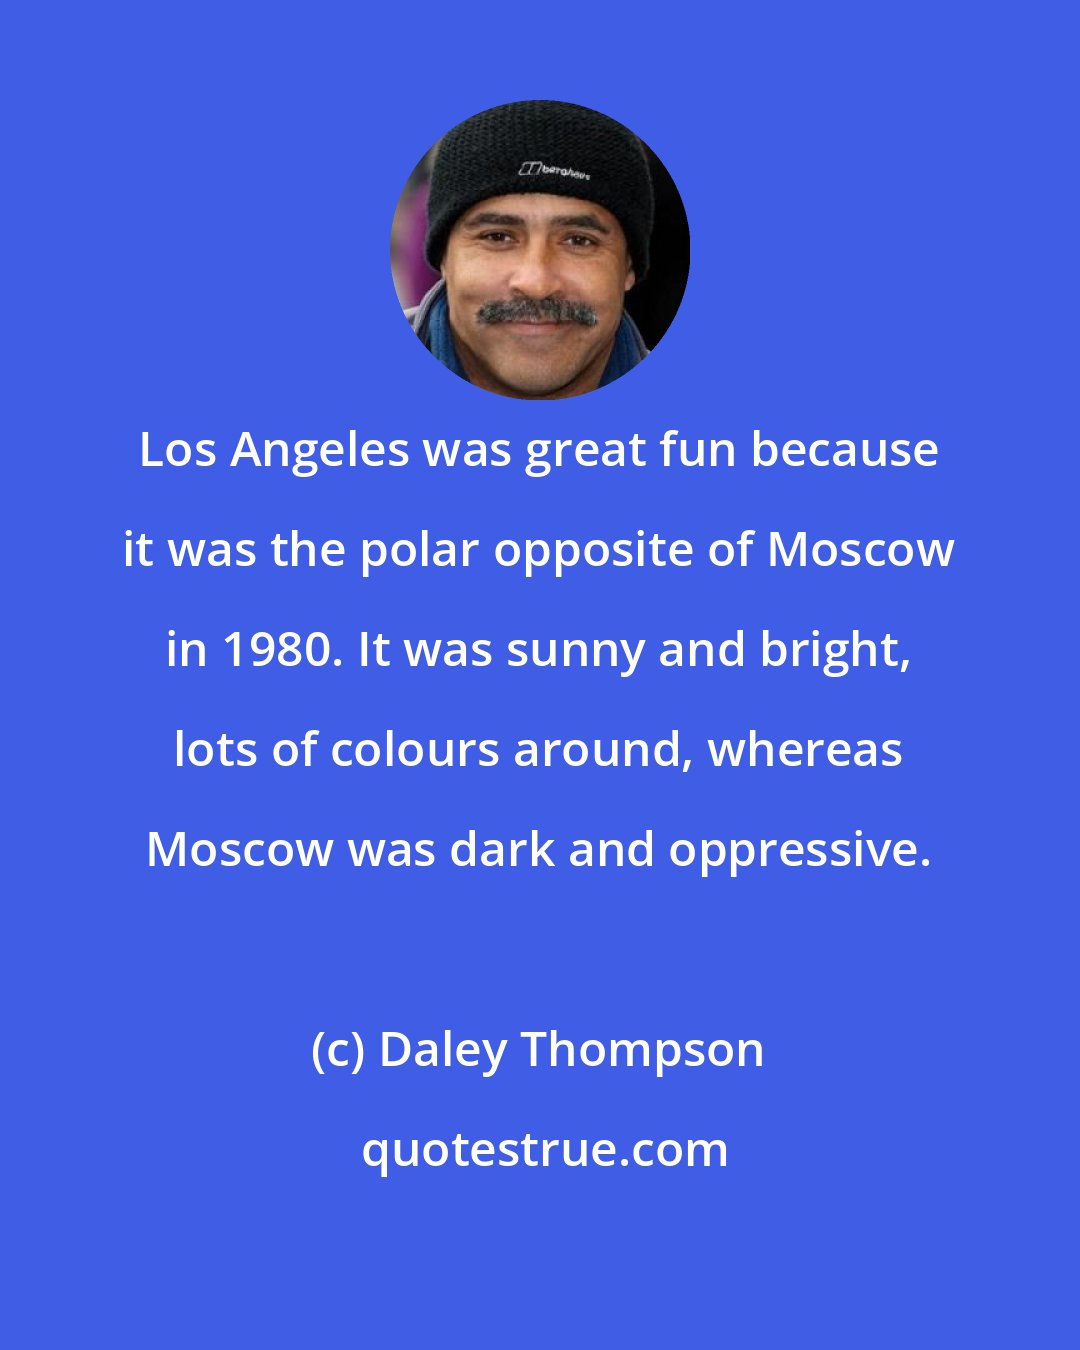 Daley Thompson: Los Angeles was great fun because it was the polar opposite of Moscow in 1980. It was sunny and bright, lots of colours around, whereas Moscow was dark and oppressive.